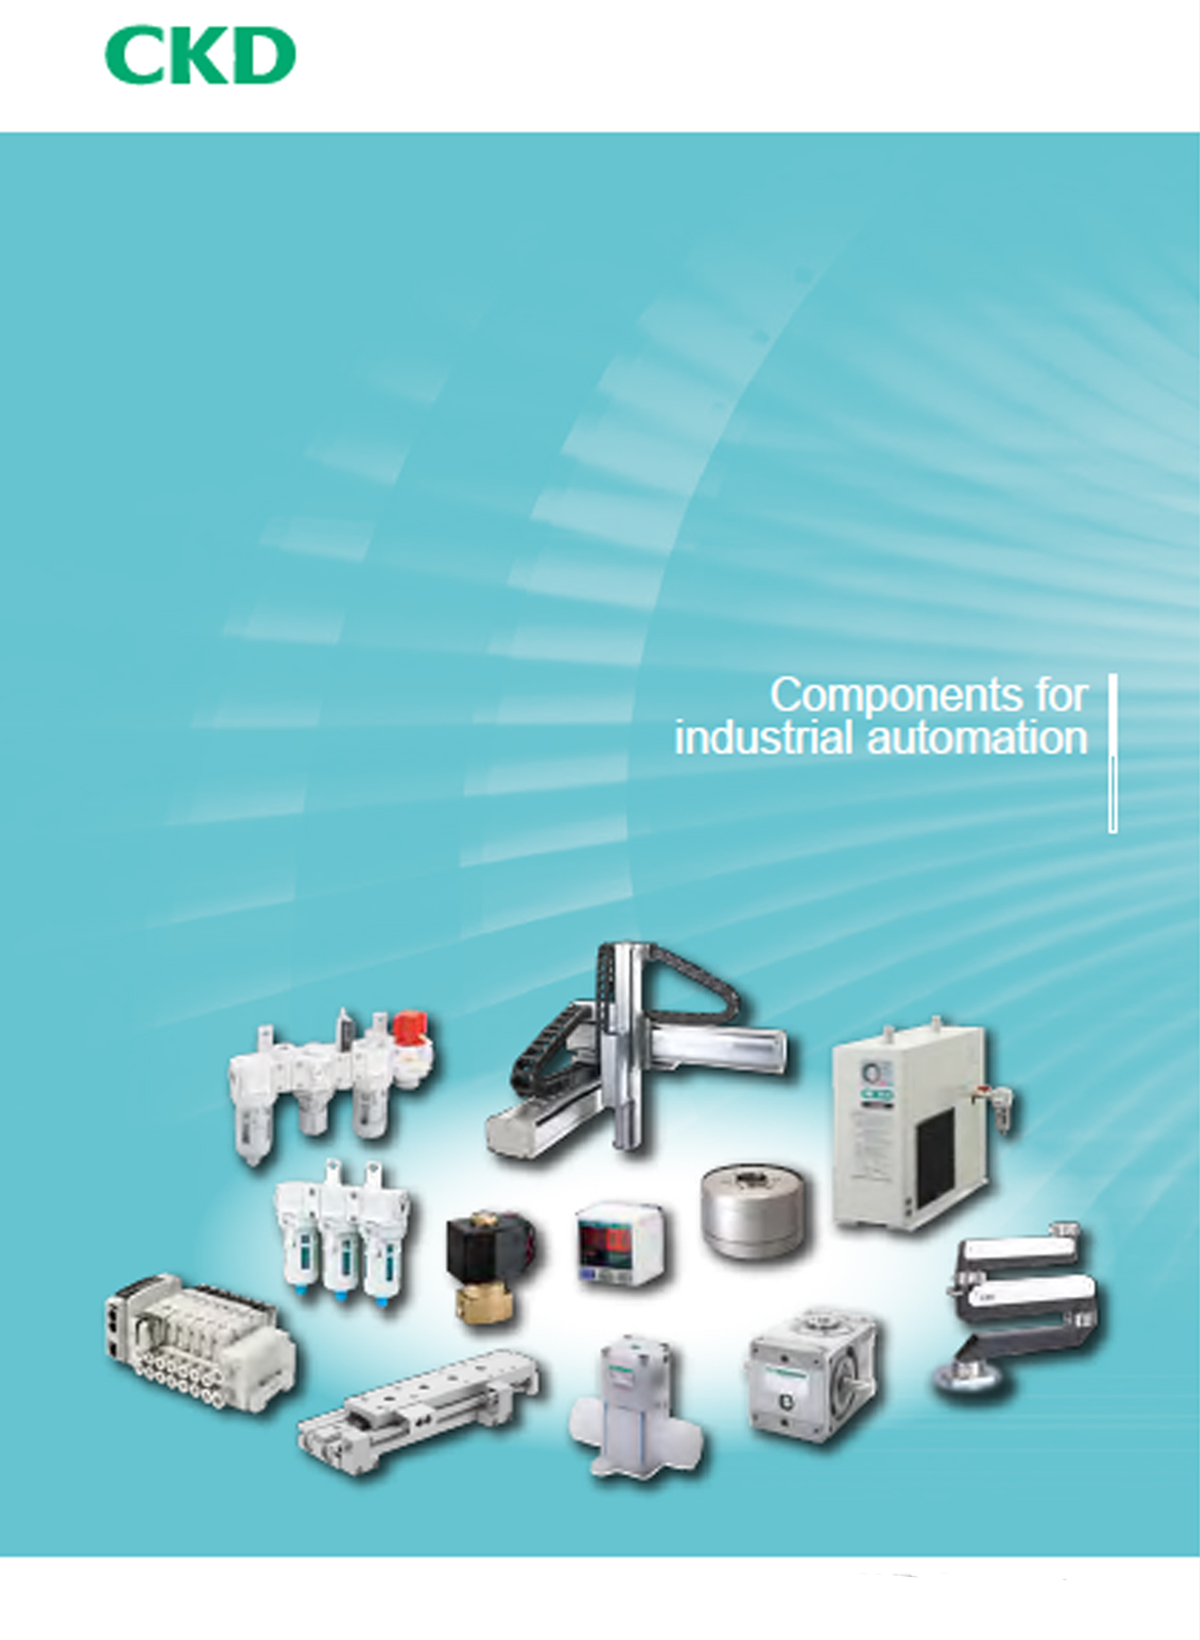 Our Components for Industrial Automation helps your selection!